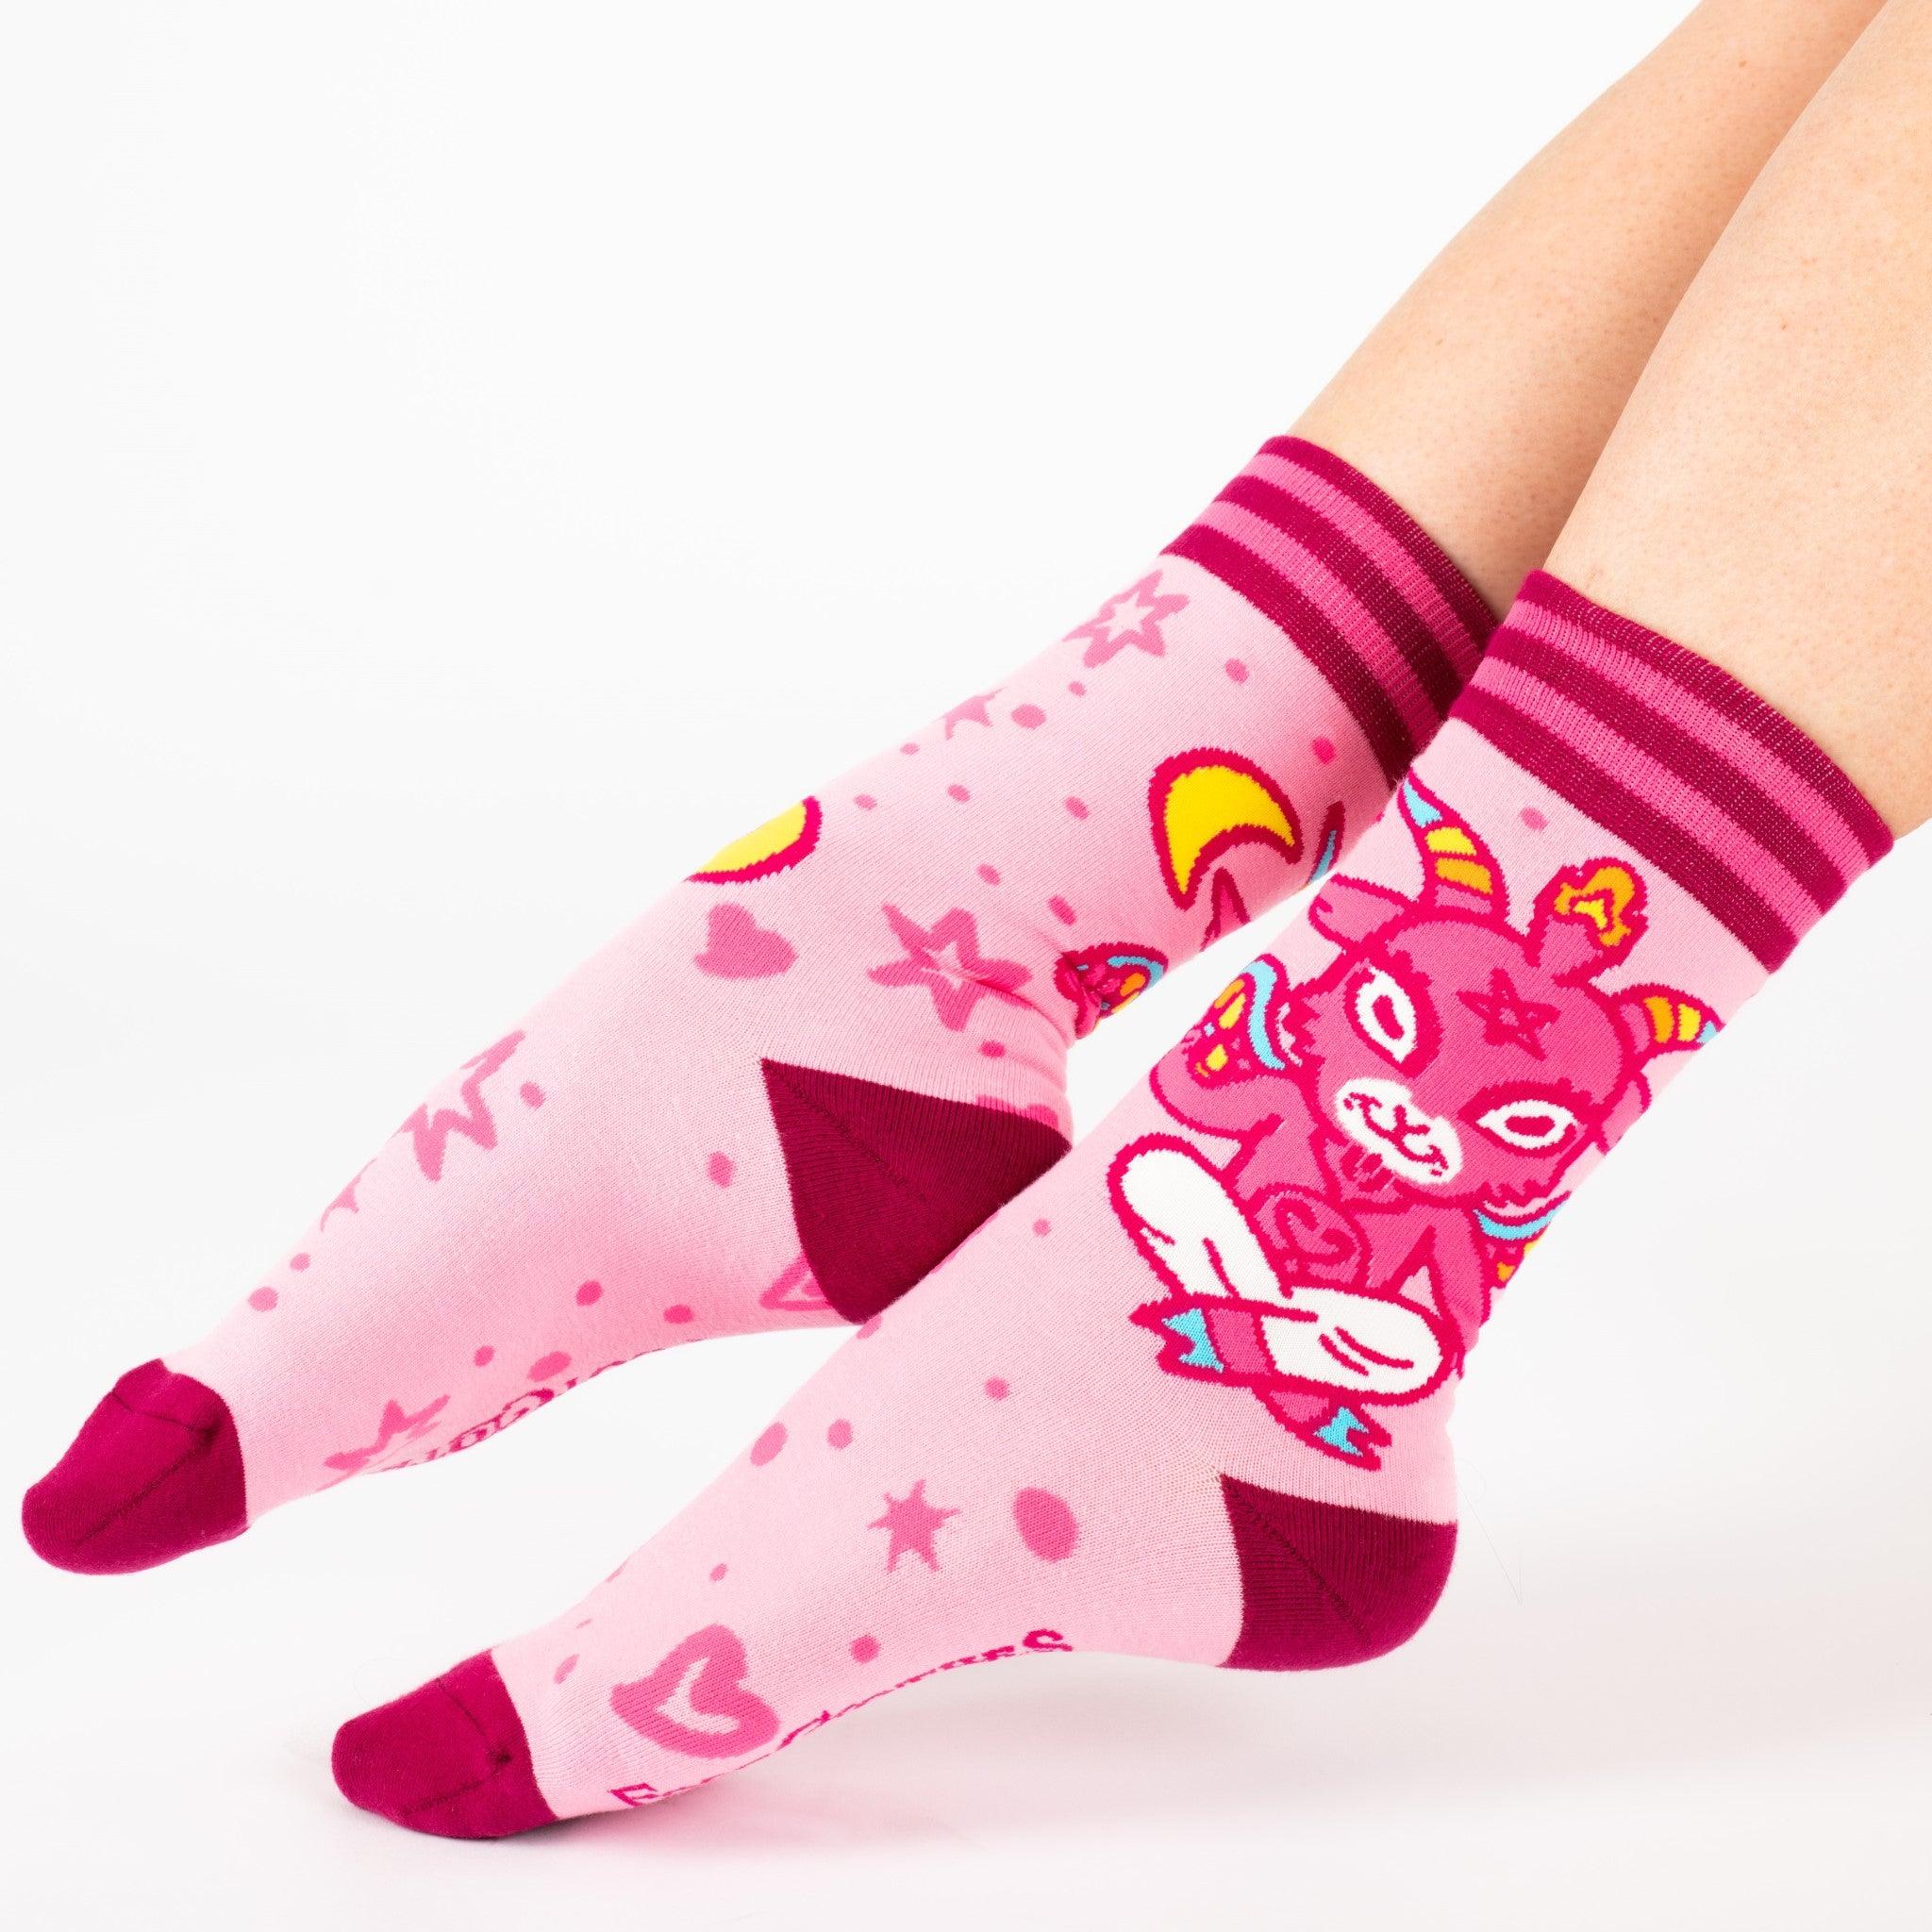 Stupid Cute Mythical Creatures Pack - FootClothes